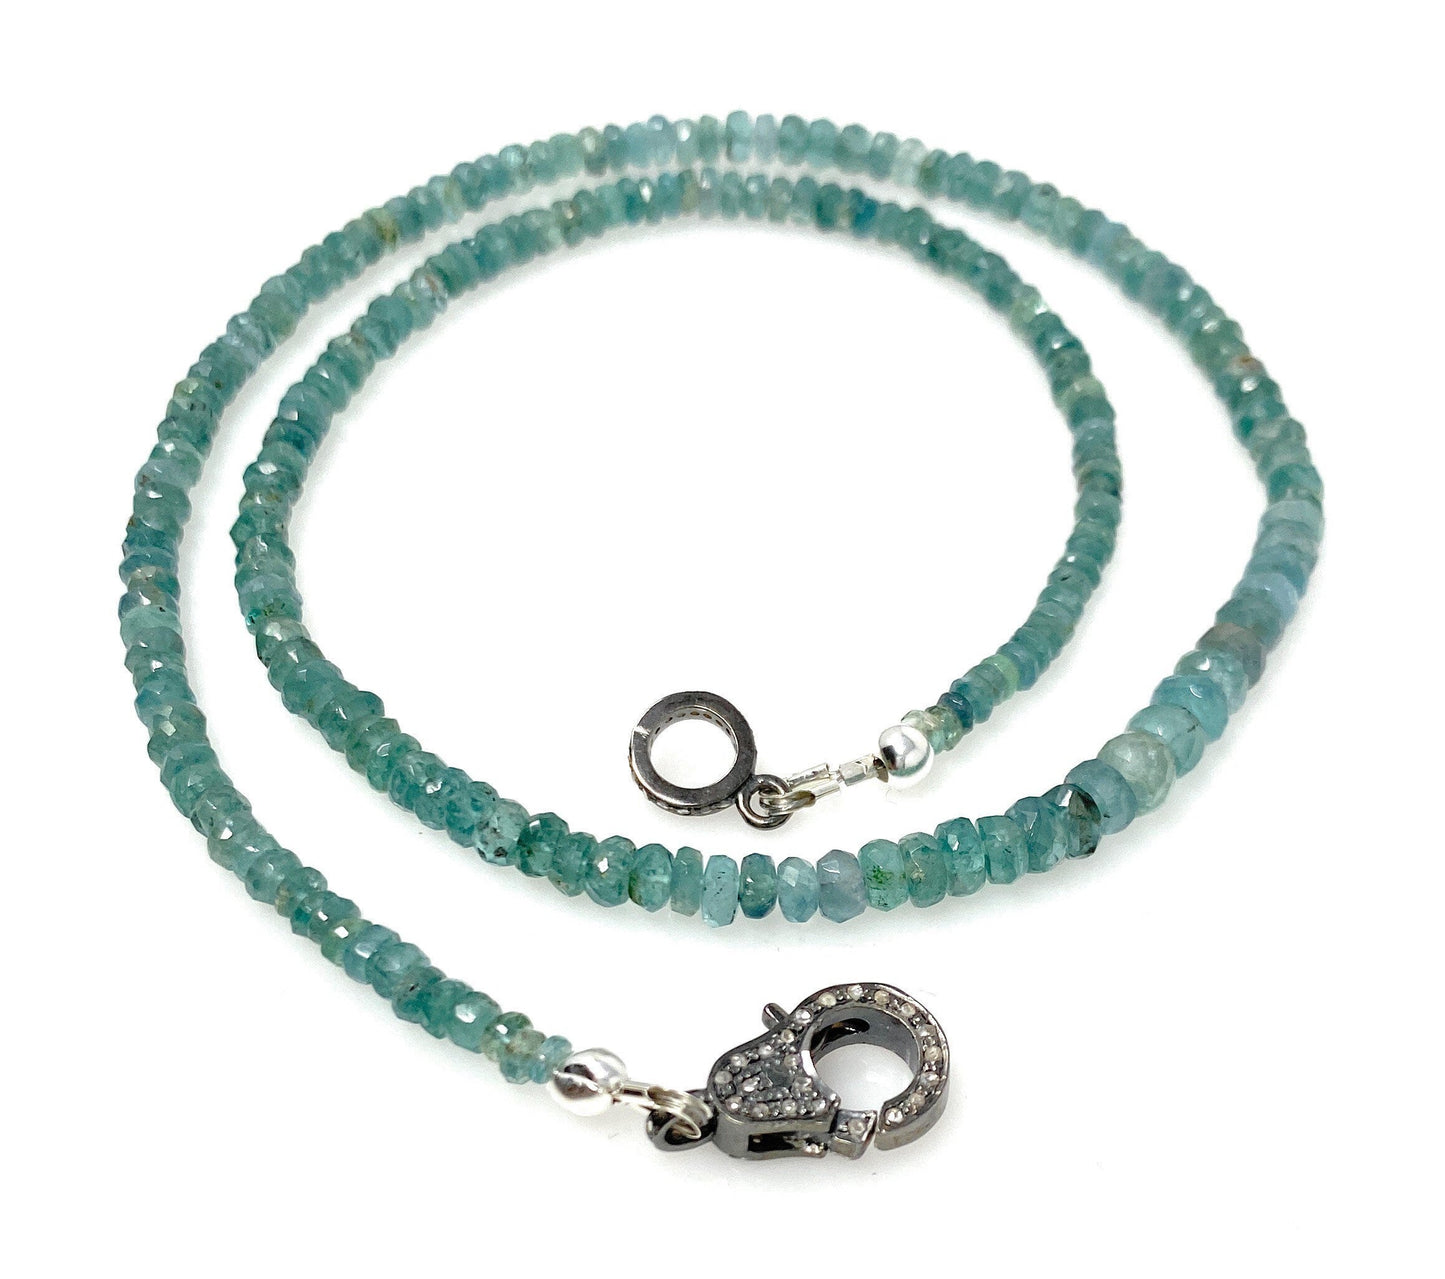 17.5” Blue Green Tourmaline Indicolite Necklace with Pave Diamond